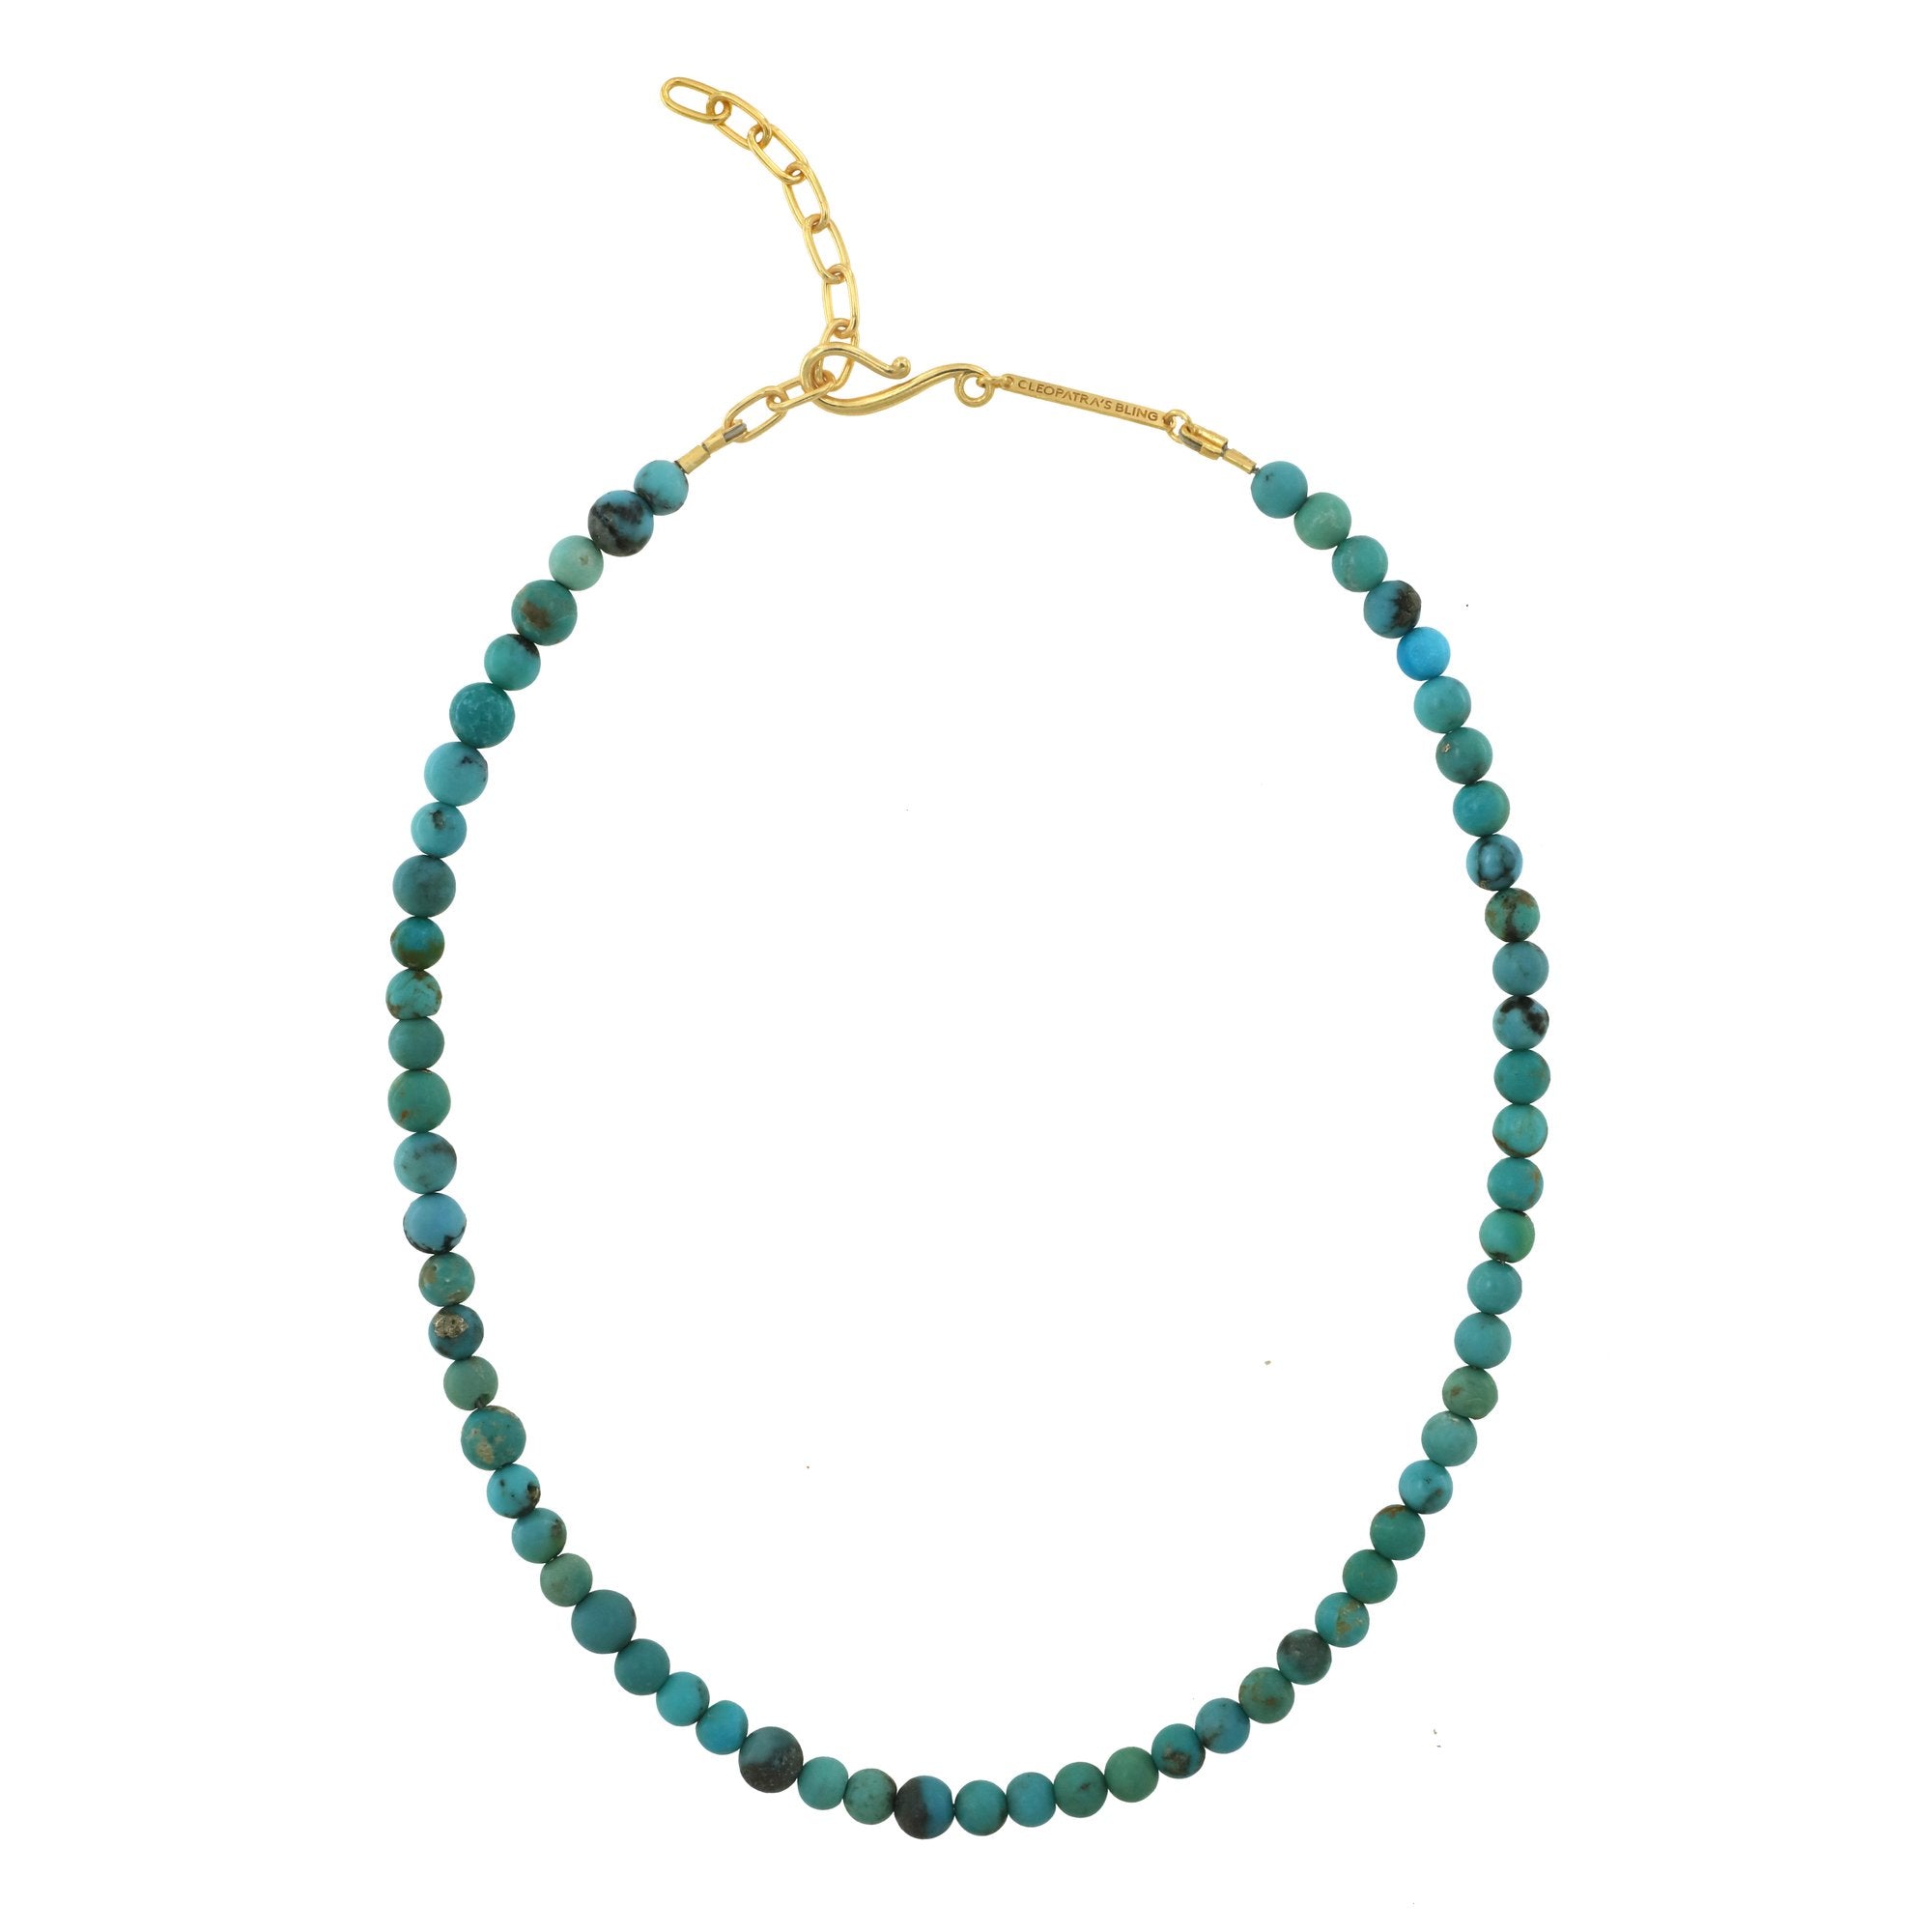 CO.NK.131 Necklace – 18K Gold Plated